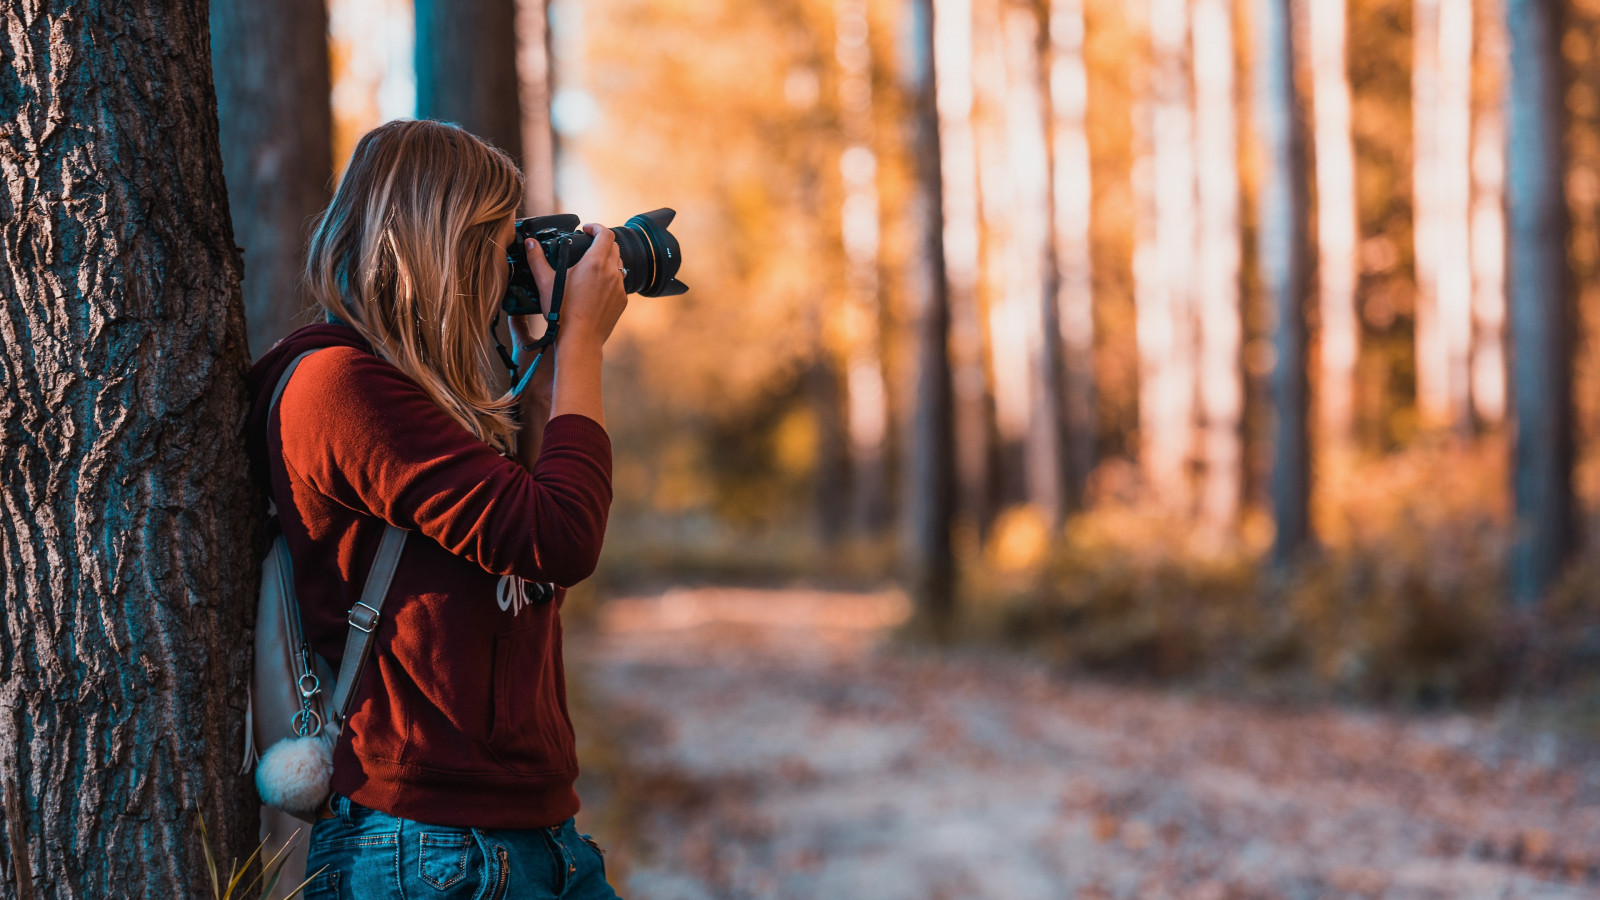 Photographer takes pictures in nature wallpaper 1600x900